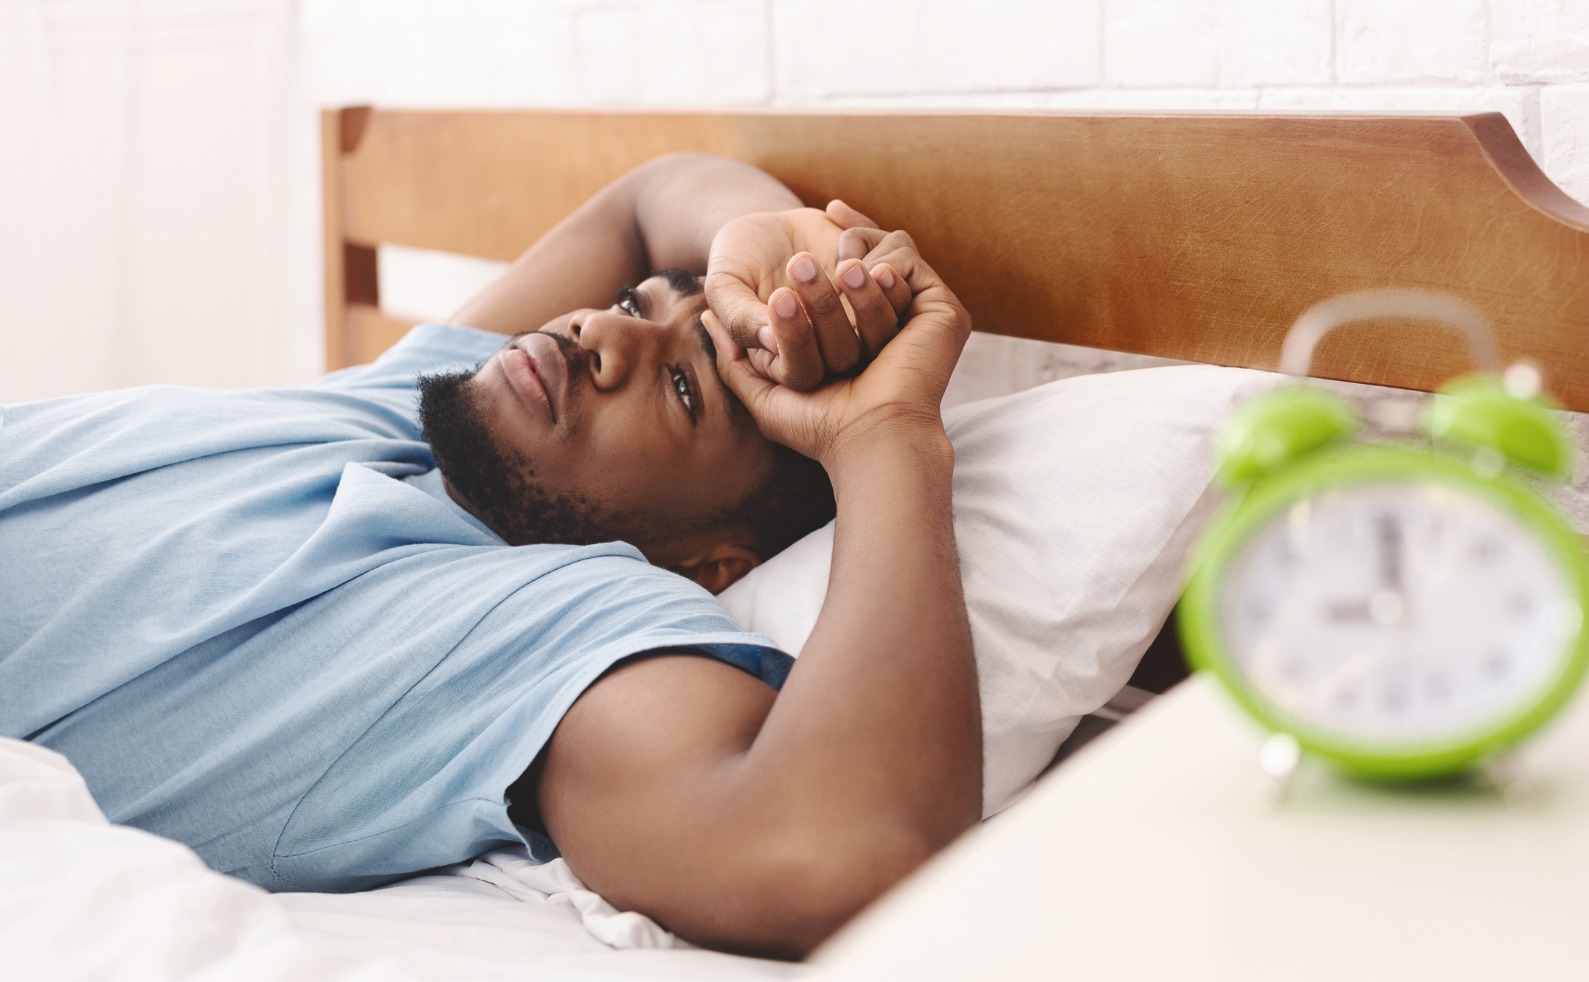 African Sleeping Porn - Does sleep have an impact on sex?